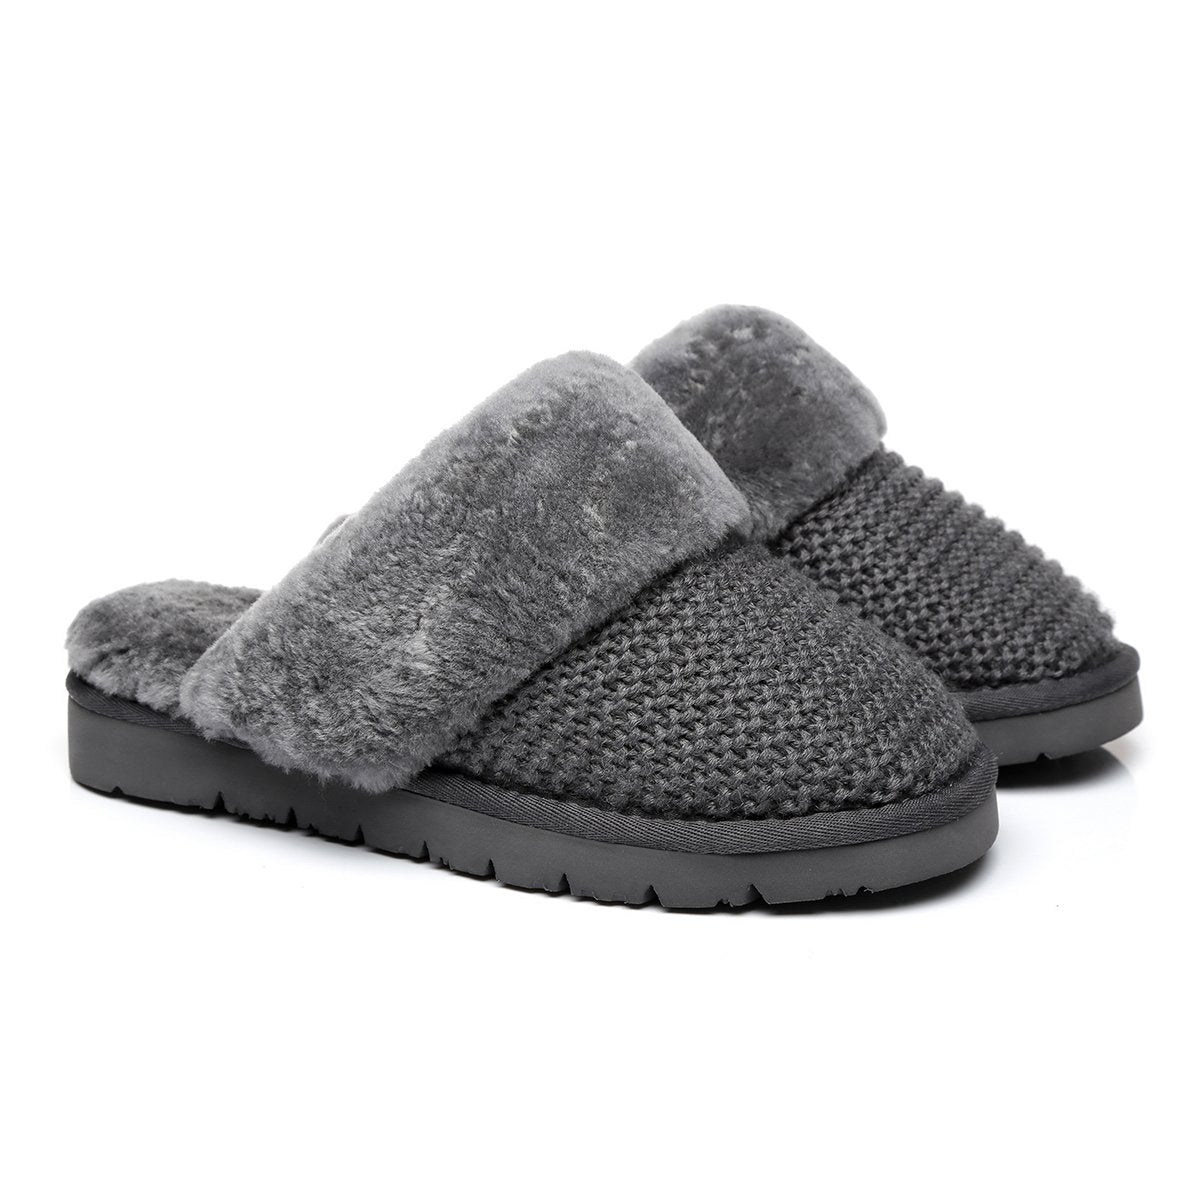 UGG Canvas Slippers